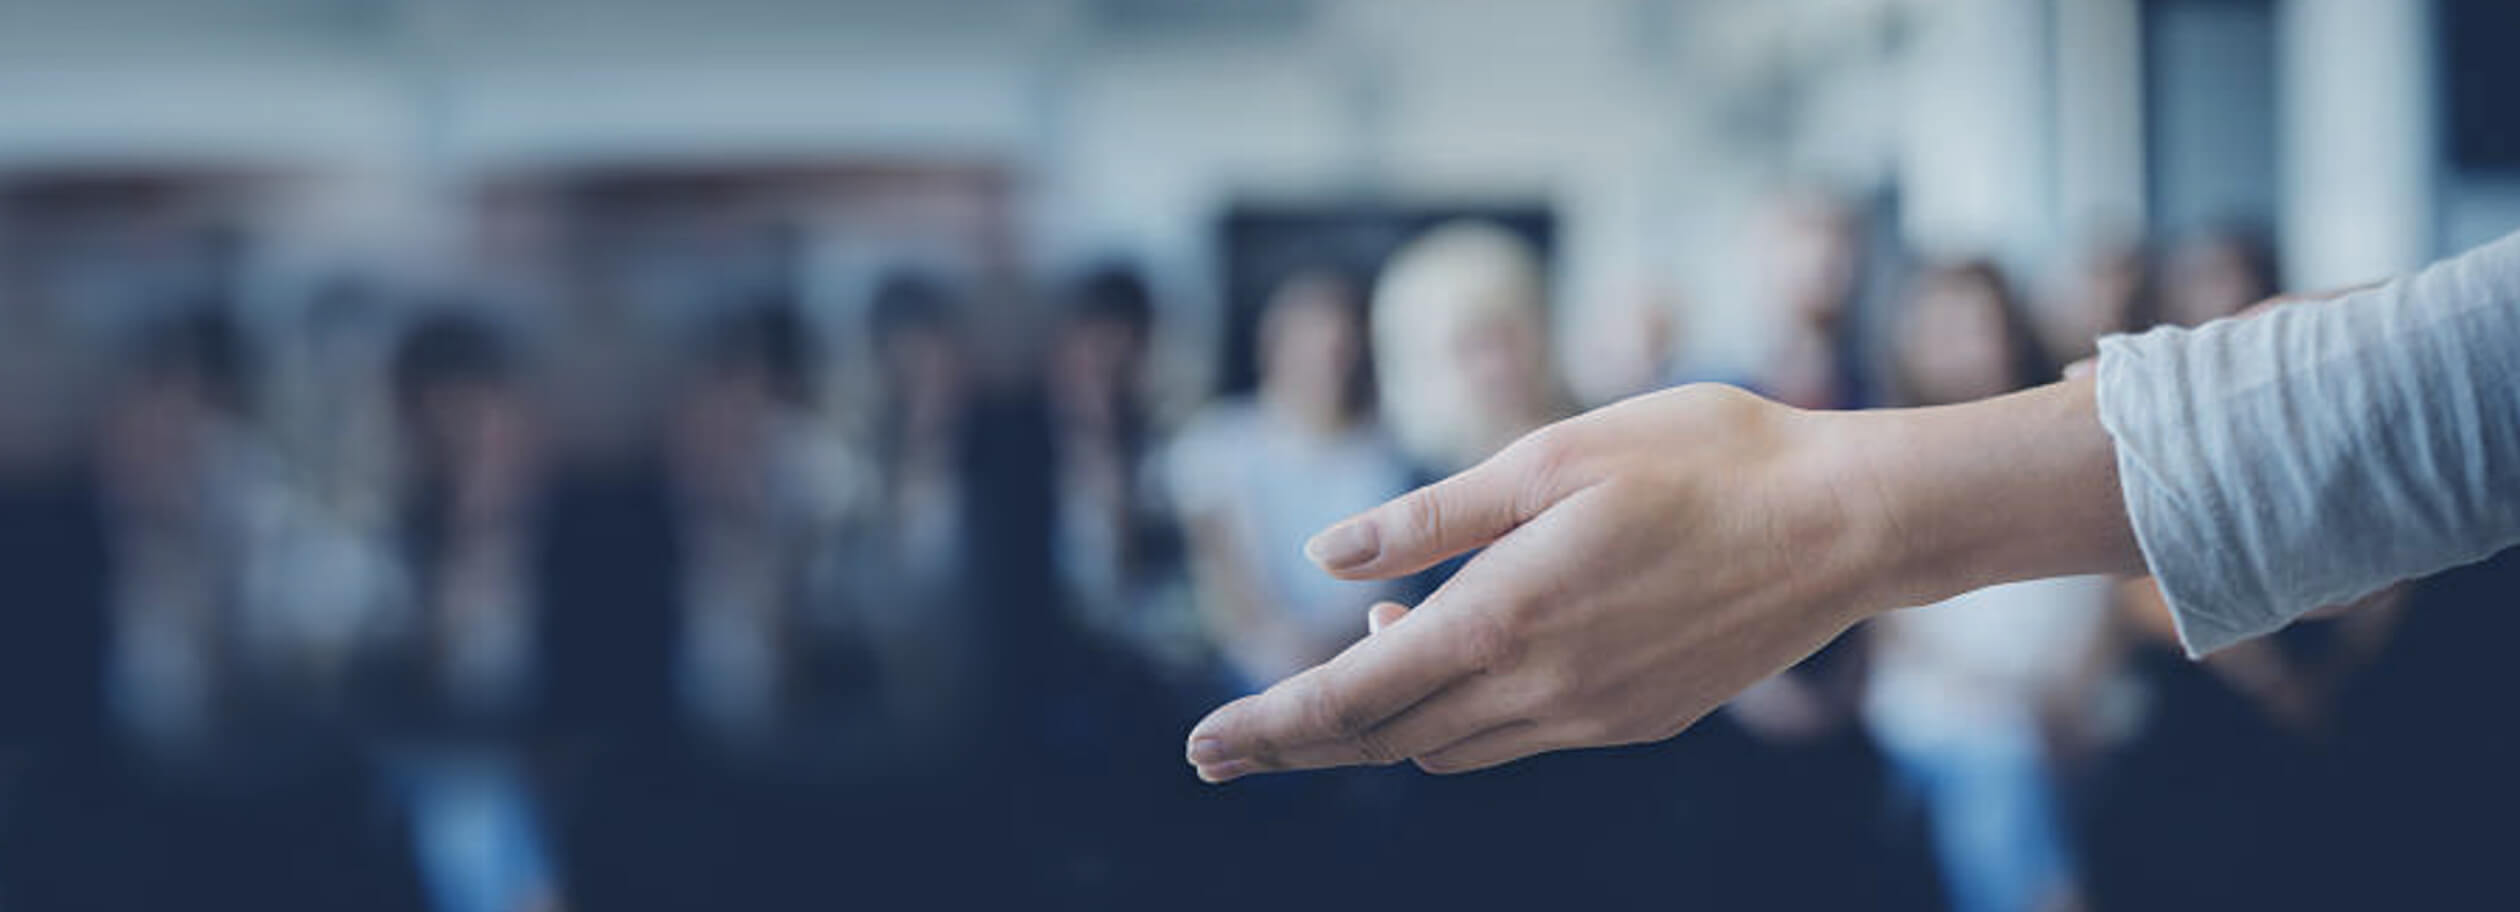 Image shows the hand of someone facing a room of people who are blurred